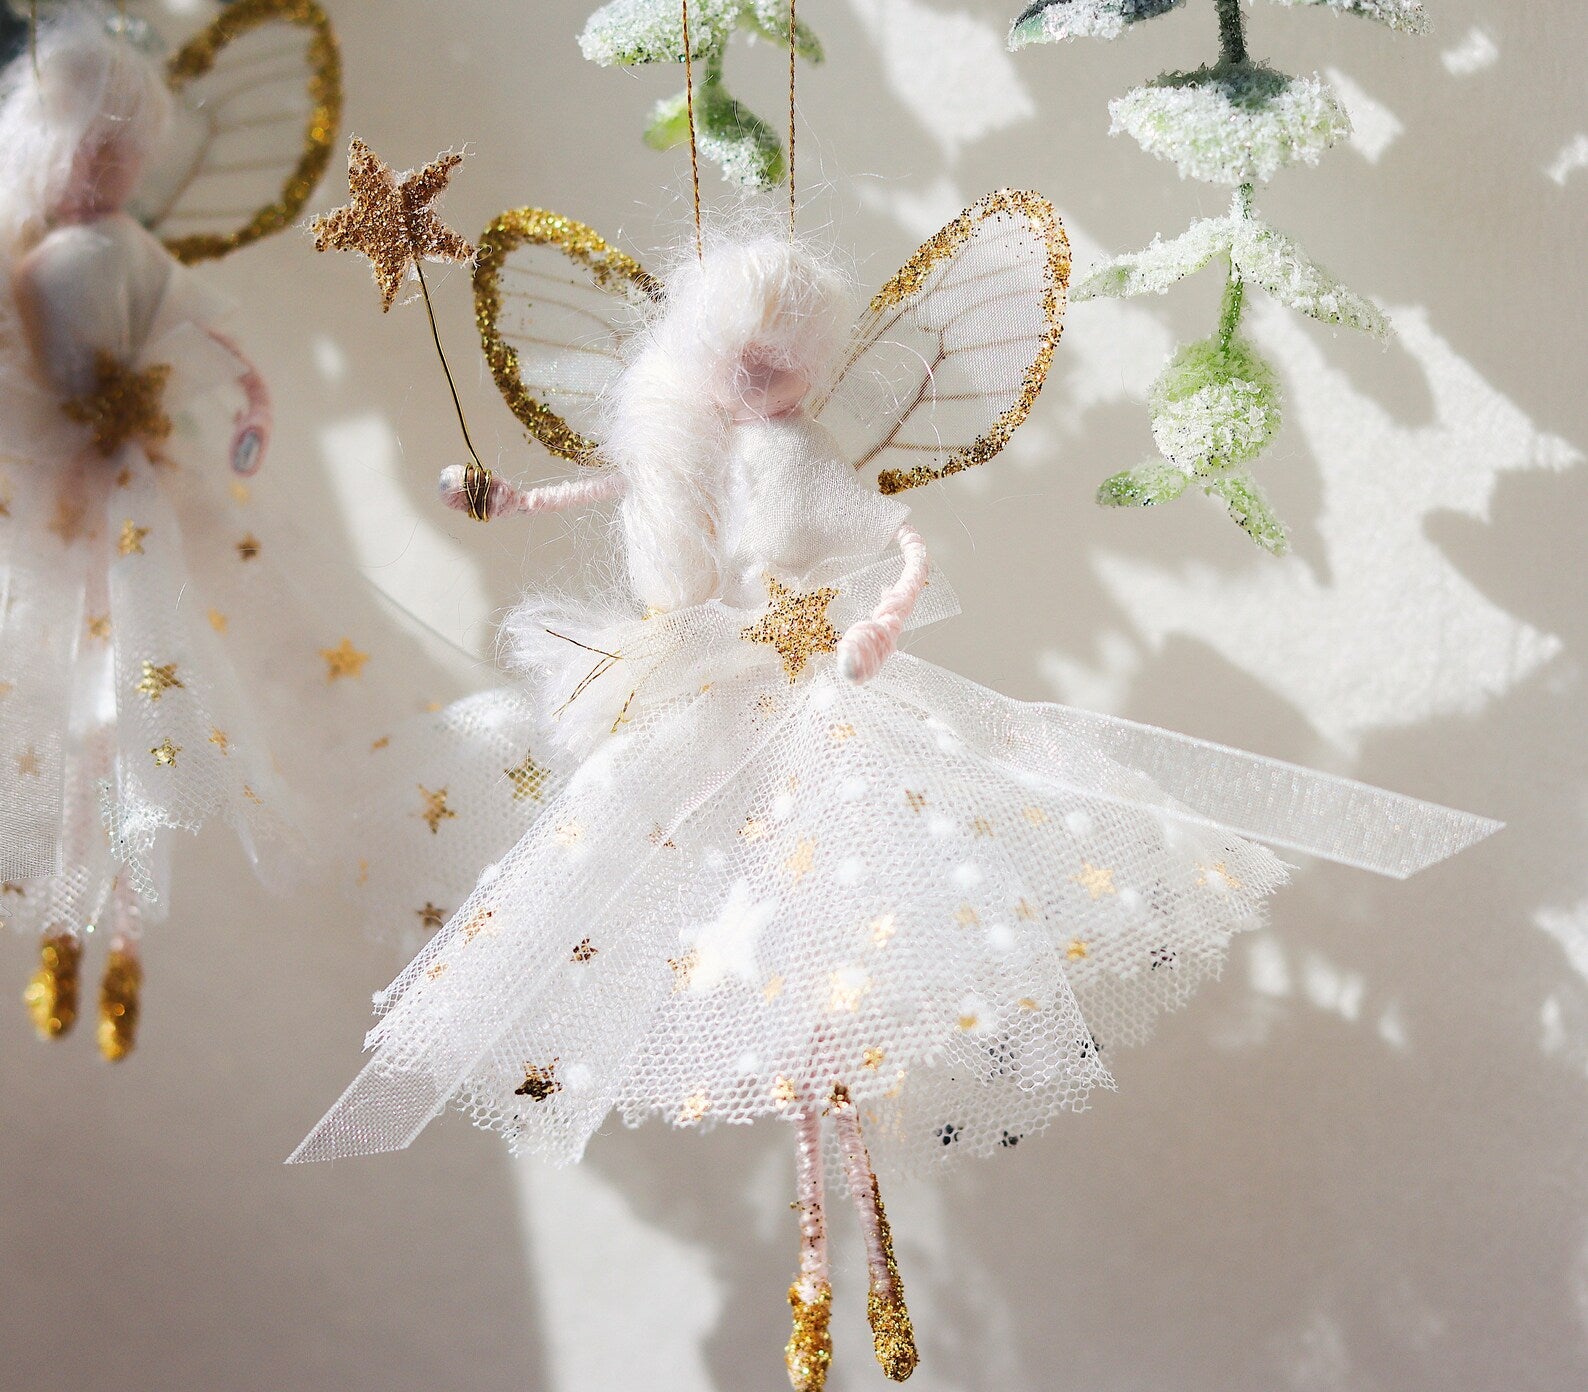 Handmade fairy decoration that makes the perfect heirloom gift for Birthdays and Special Occasions.